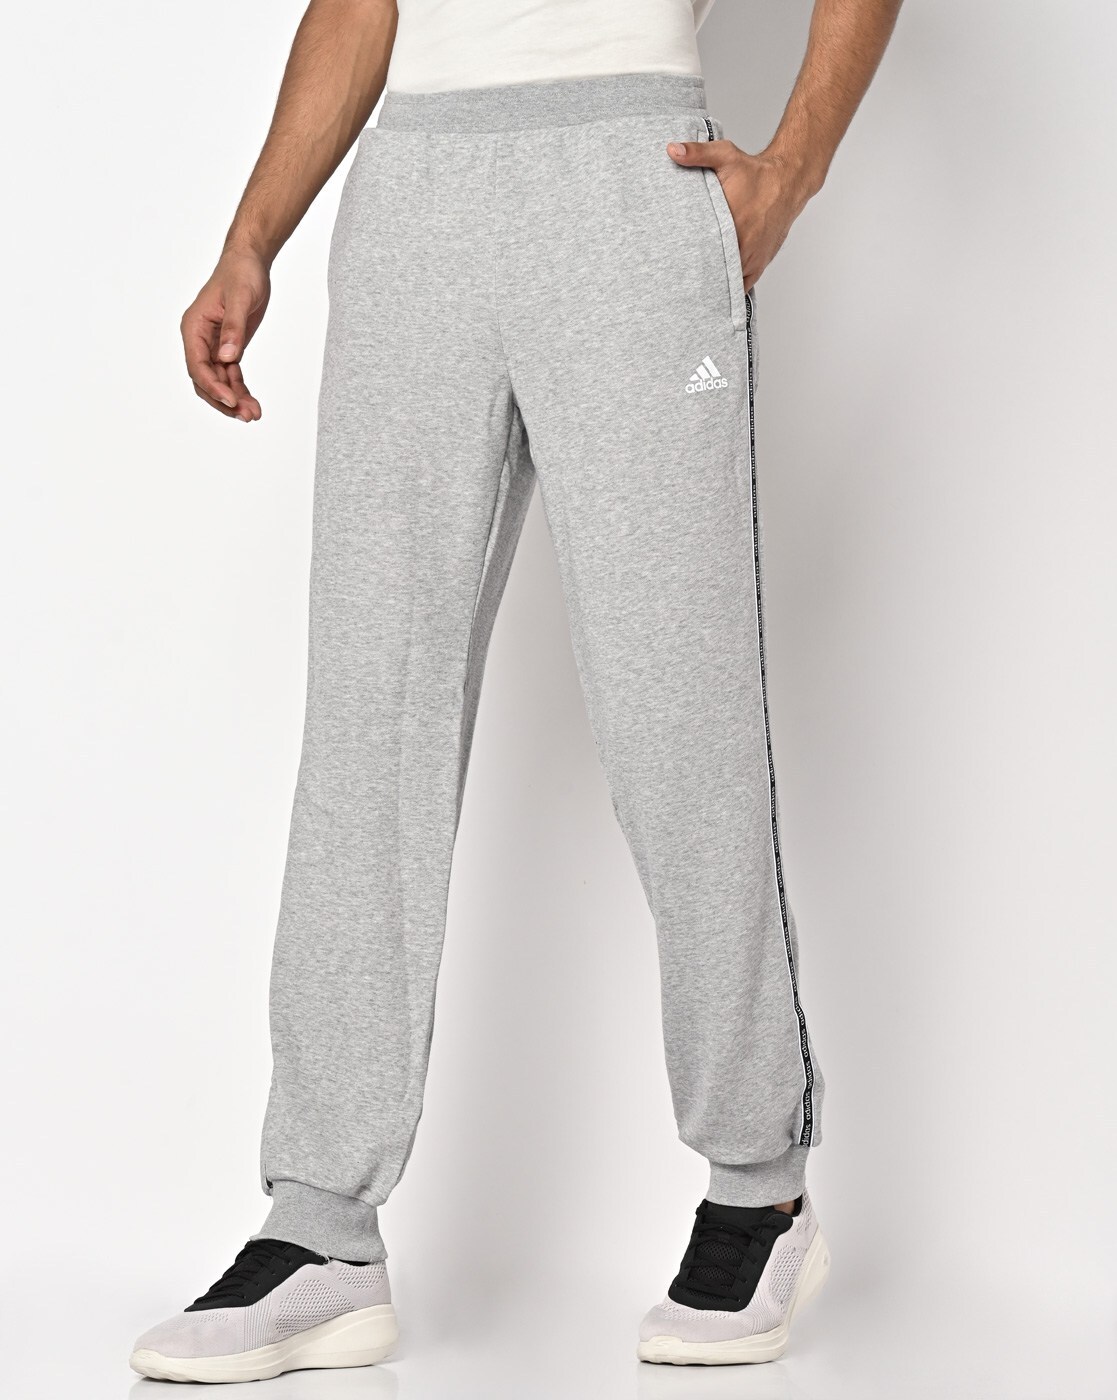 adidas Essentials 3-Stripes Men's Warm-Up Track Pants - Free Shipping | DSW